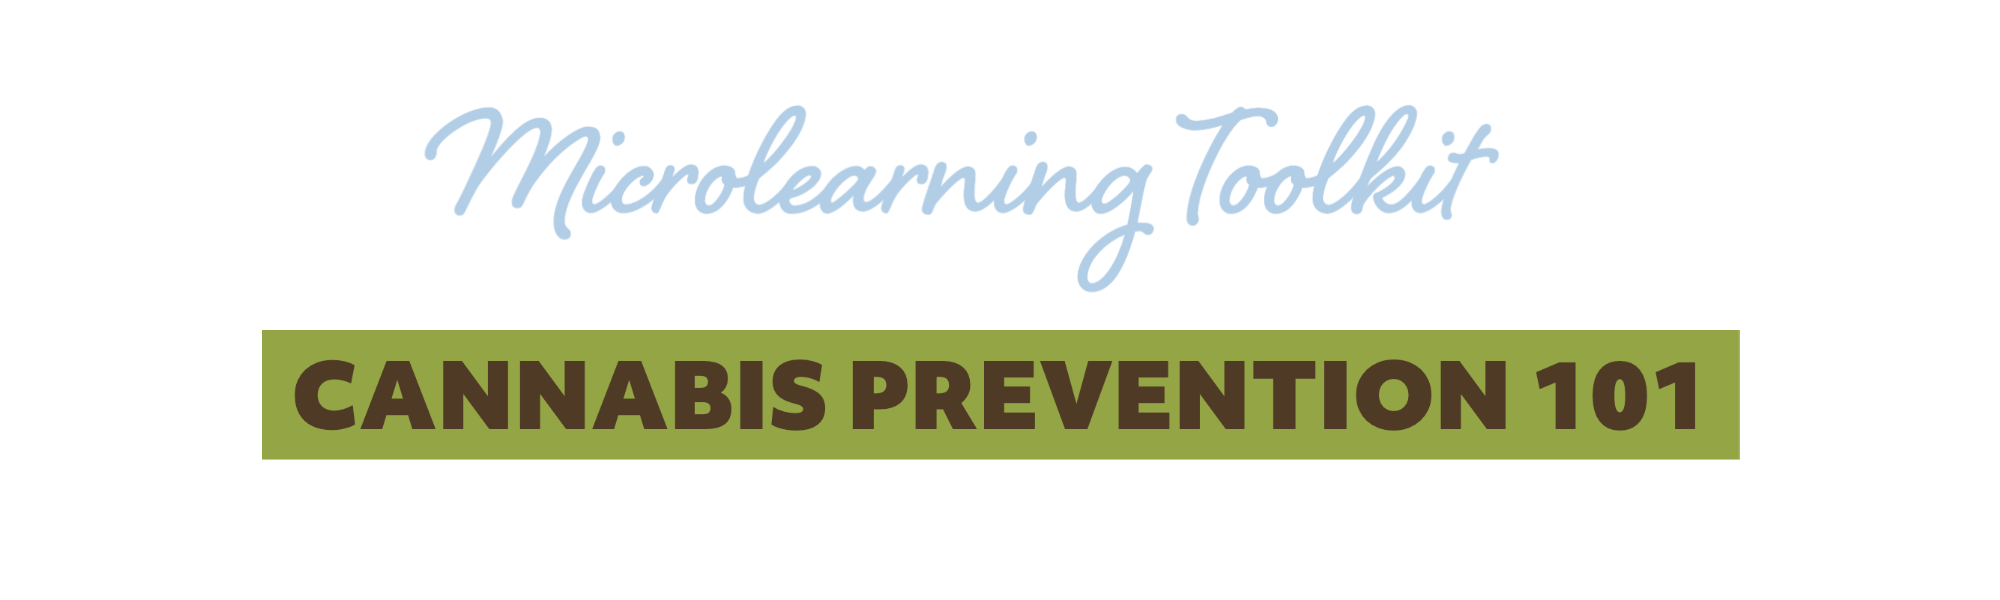 Microlearning Toolkit Header Cannabis Prevention 101